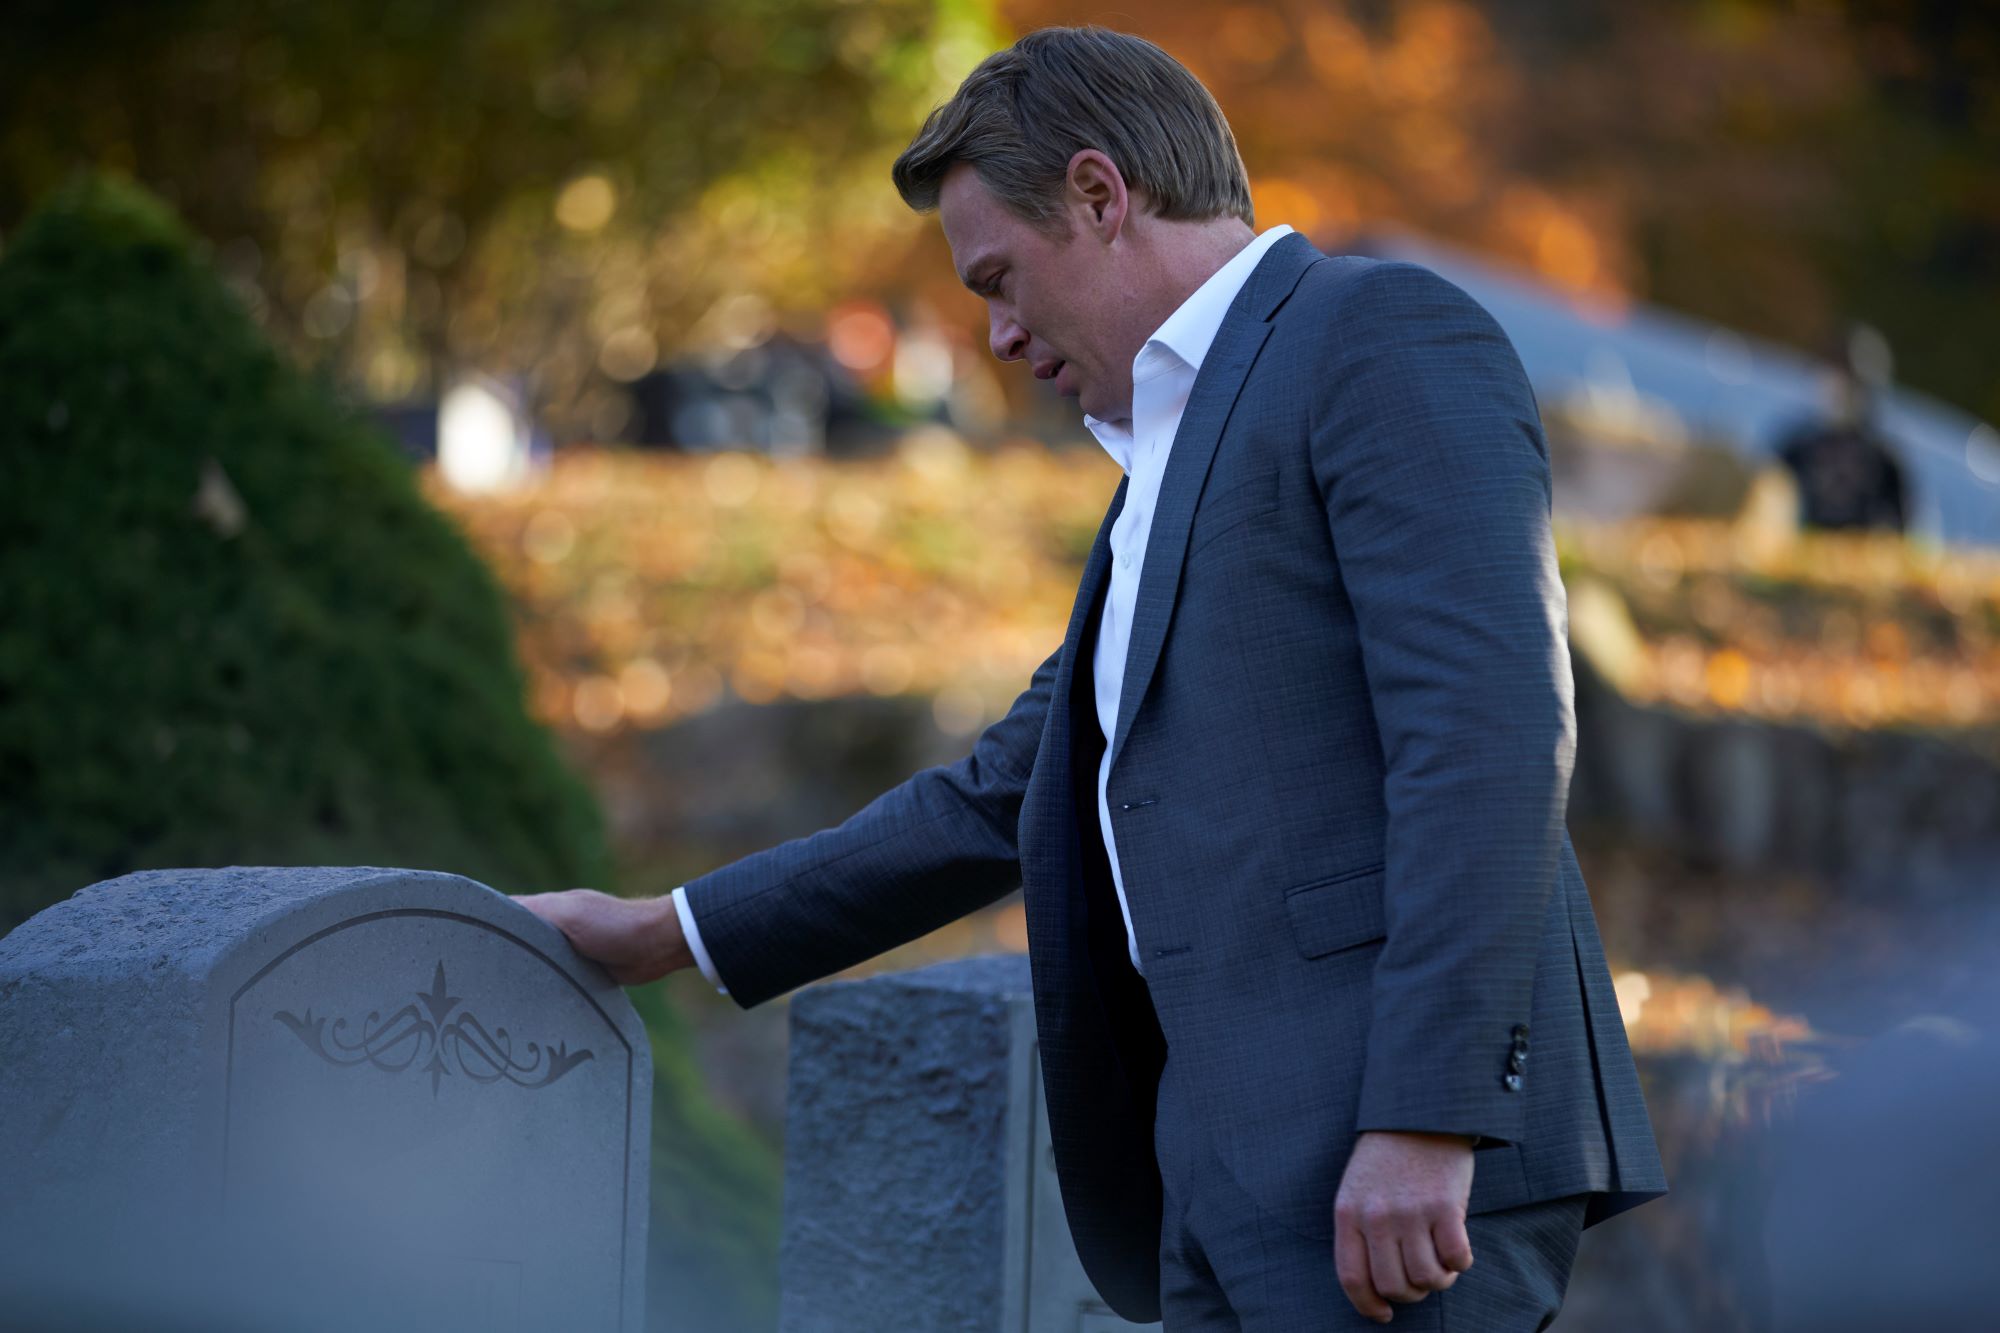 'The Blacklist' Season 9 star Diego Klattenhoff, in character as Donald Ressler, wears a gray suit over a white button-up shirt as he visits a grave. 'The Blacklist' Season 9 is new tonight, Jan. 6, with episode 7.